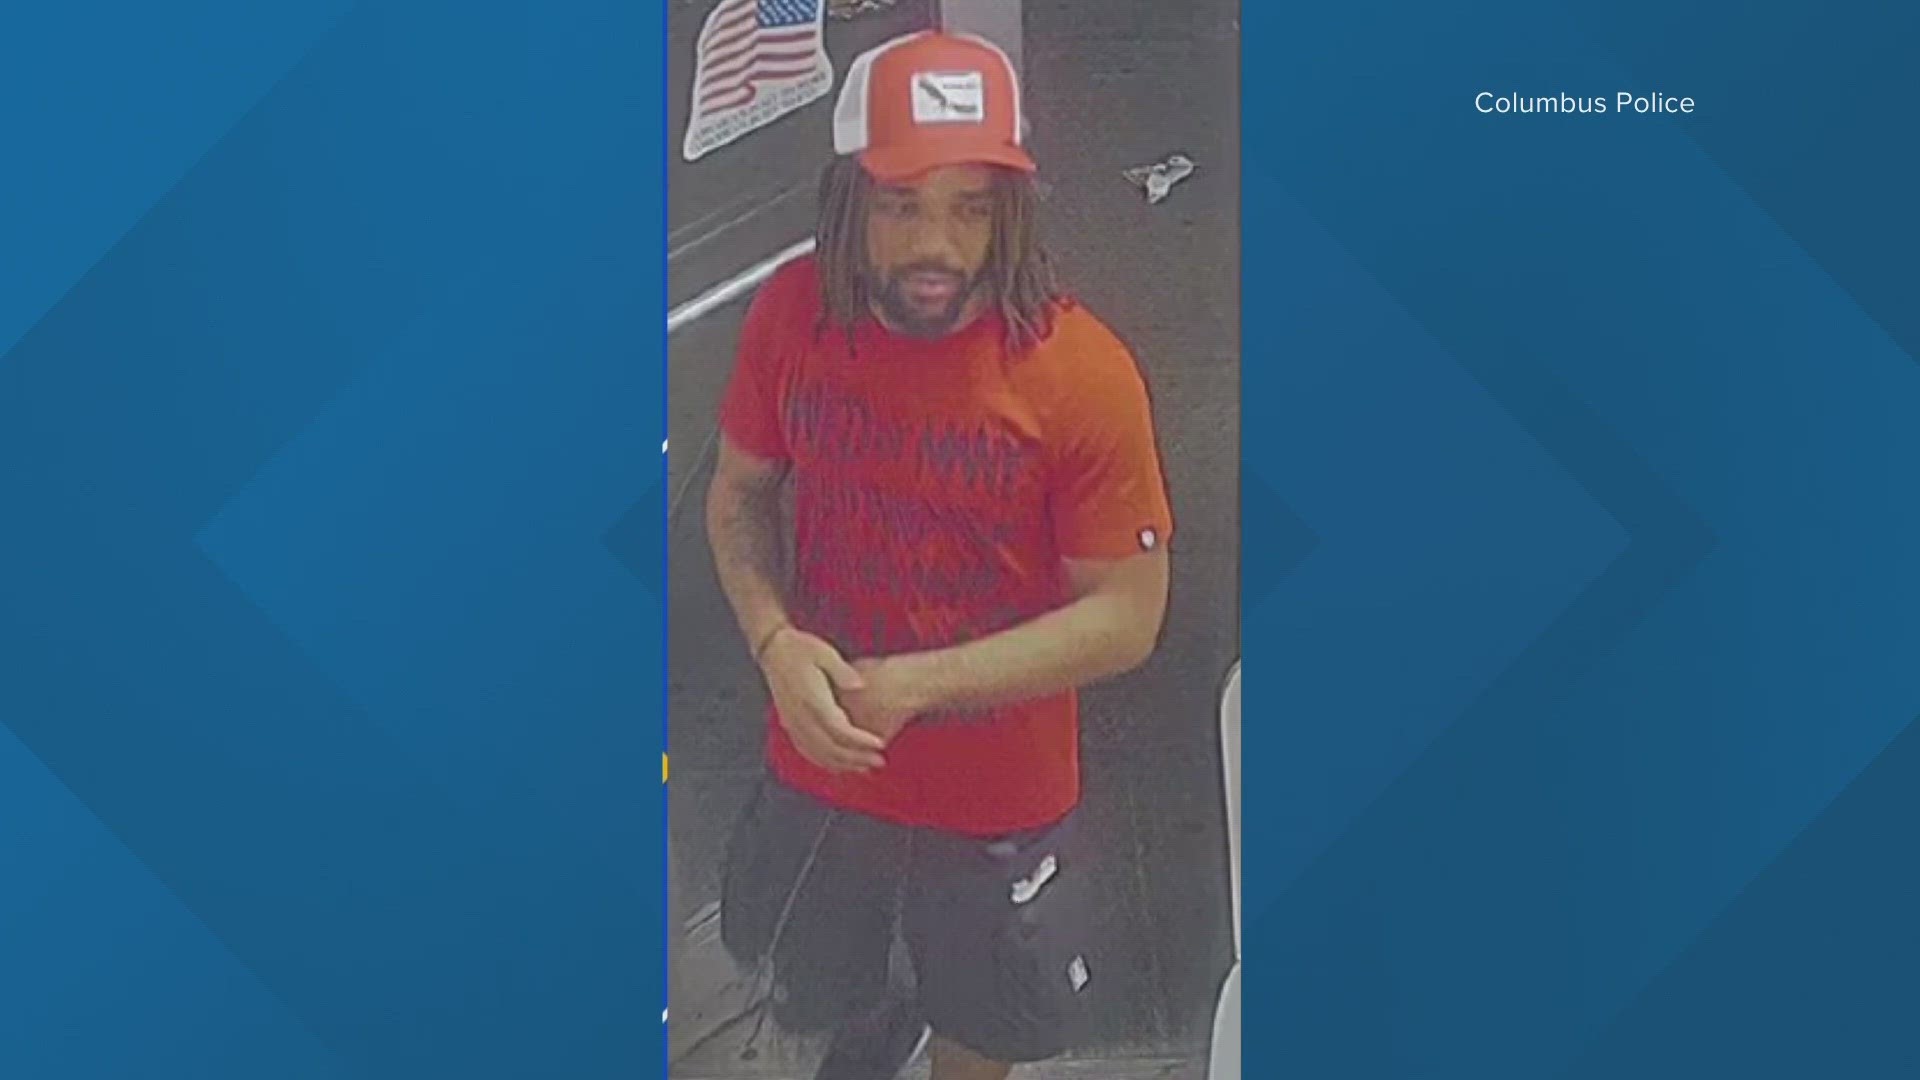 Police Seek To Id Person Of Interest In Incident Near Ohio State